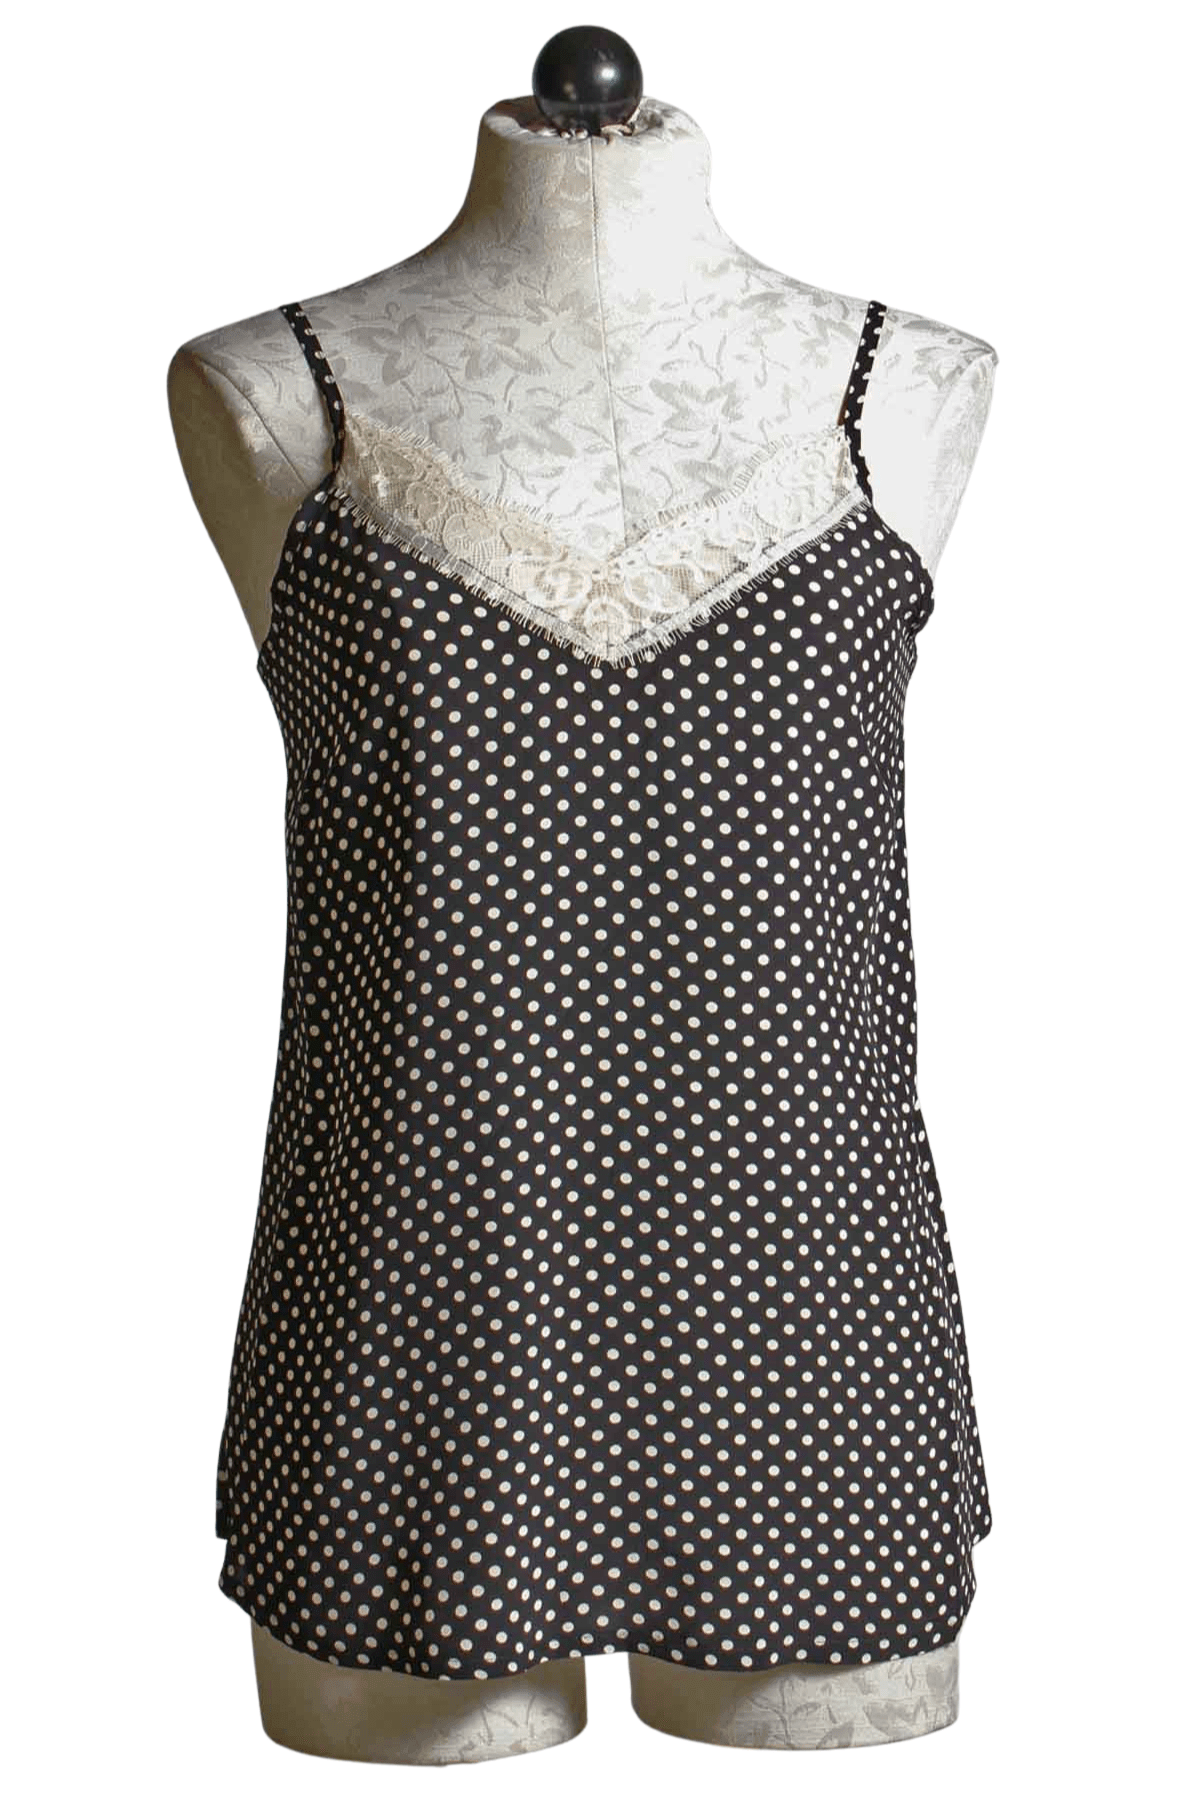 Lace trimmed black with white polka dot cami